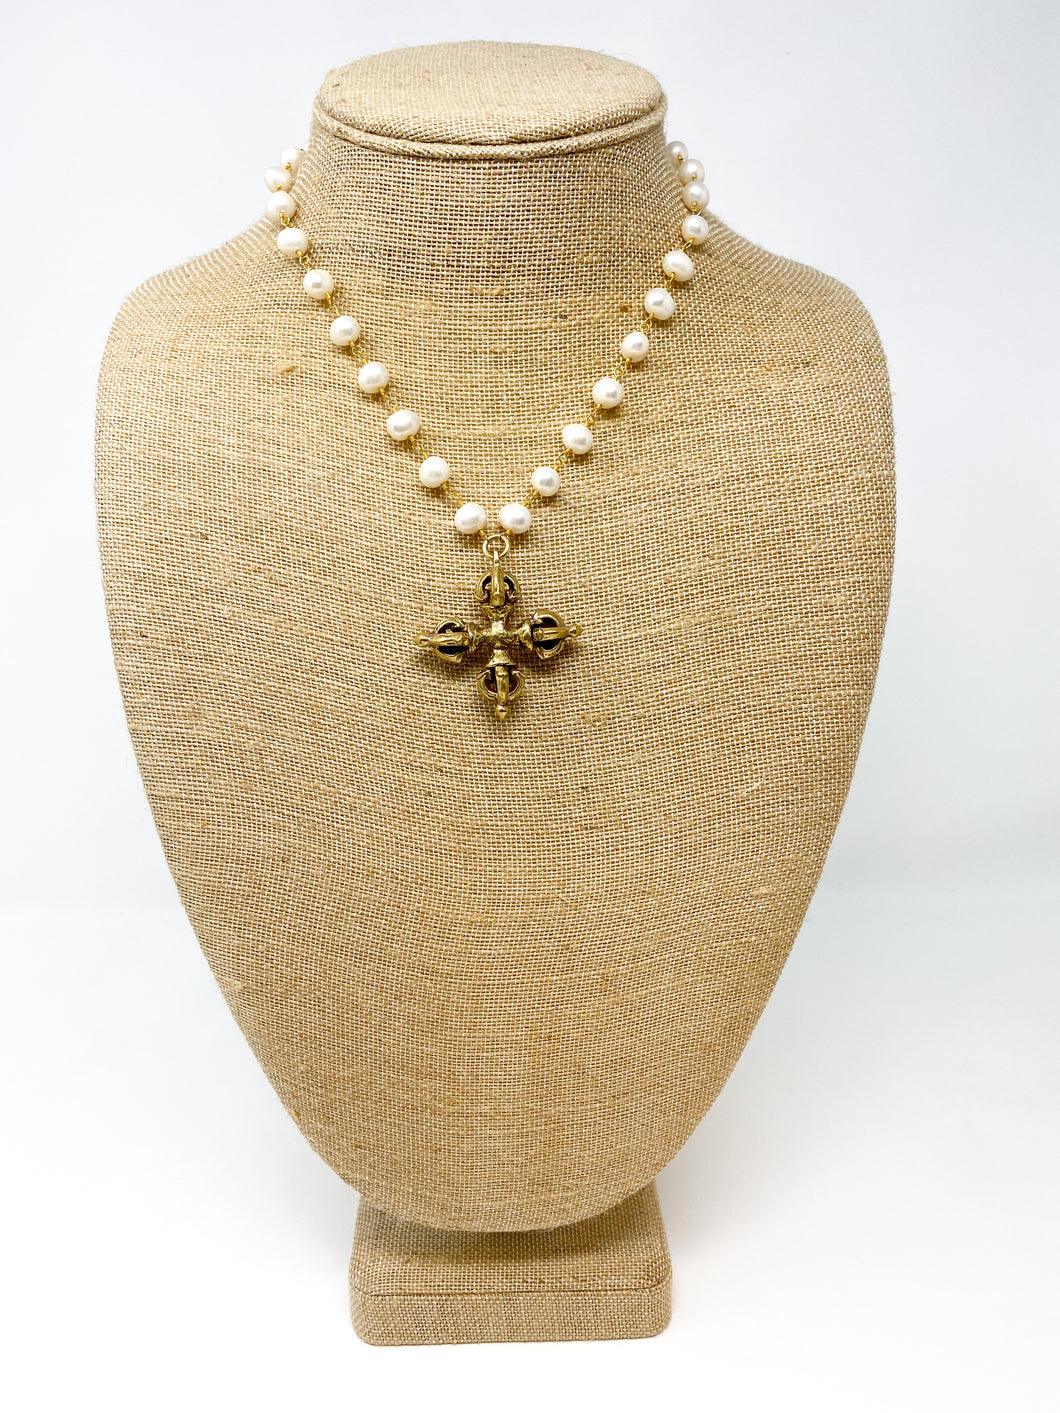 Pearl Necklace with Cross Pendant